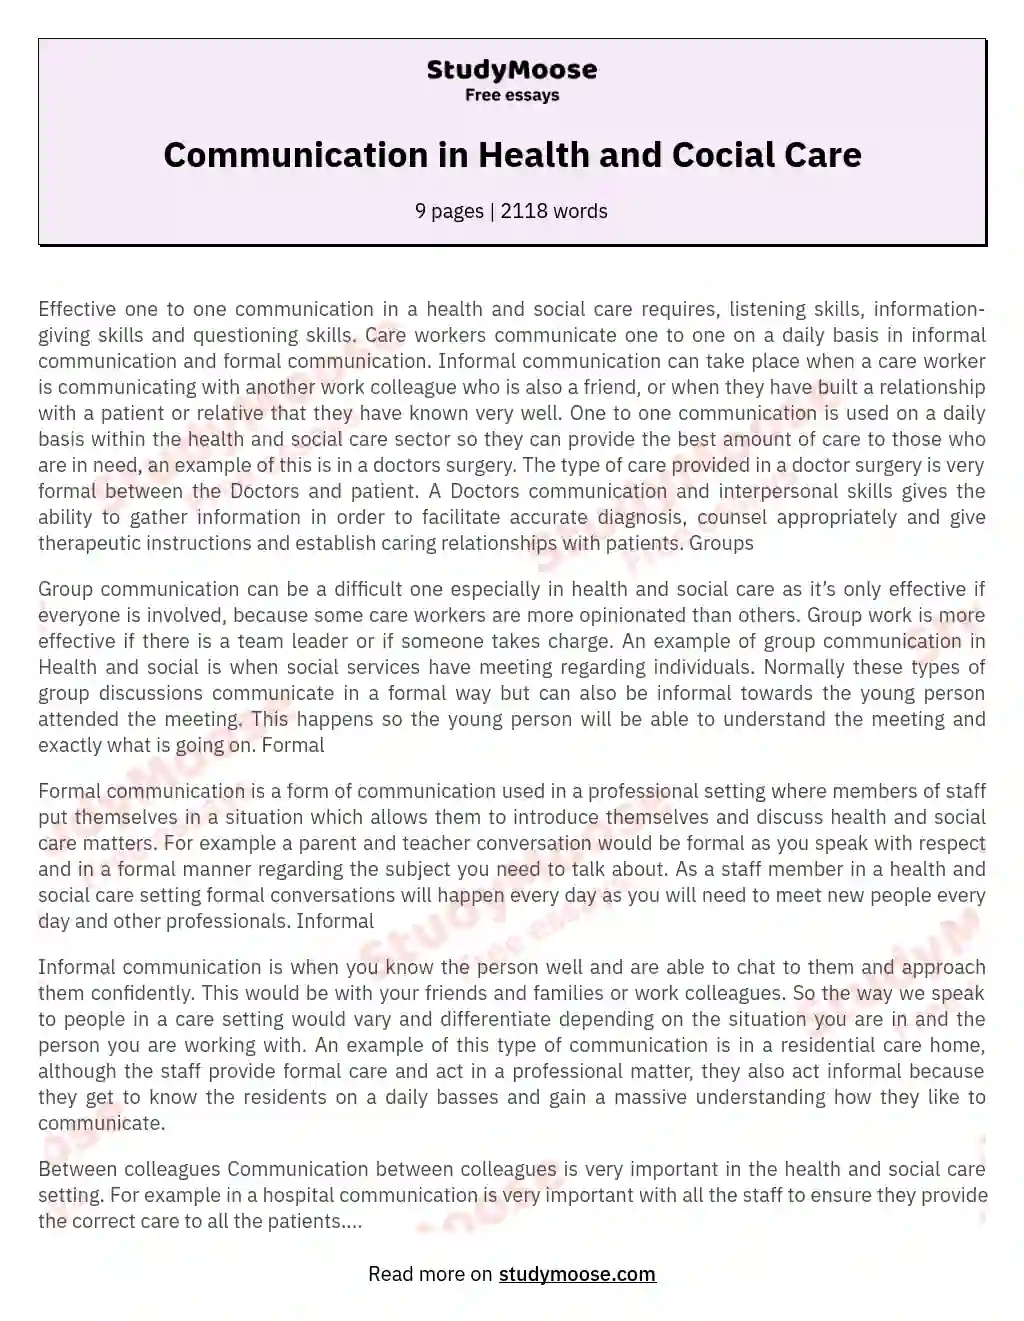 Communication in Health and Cocial Care essay